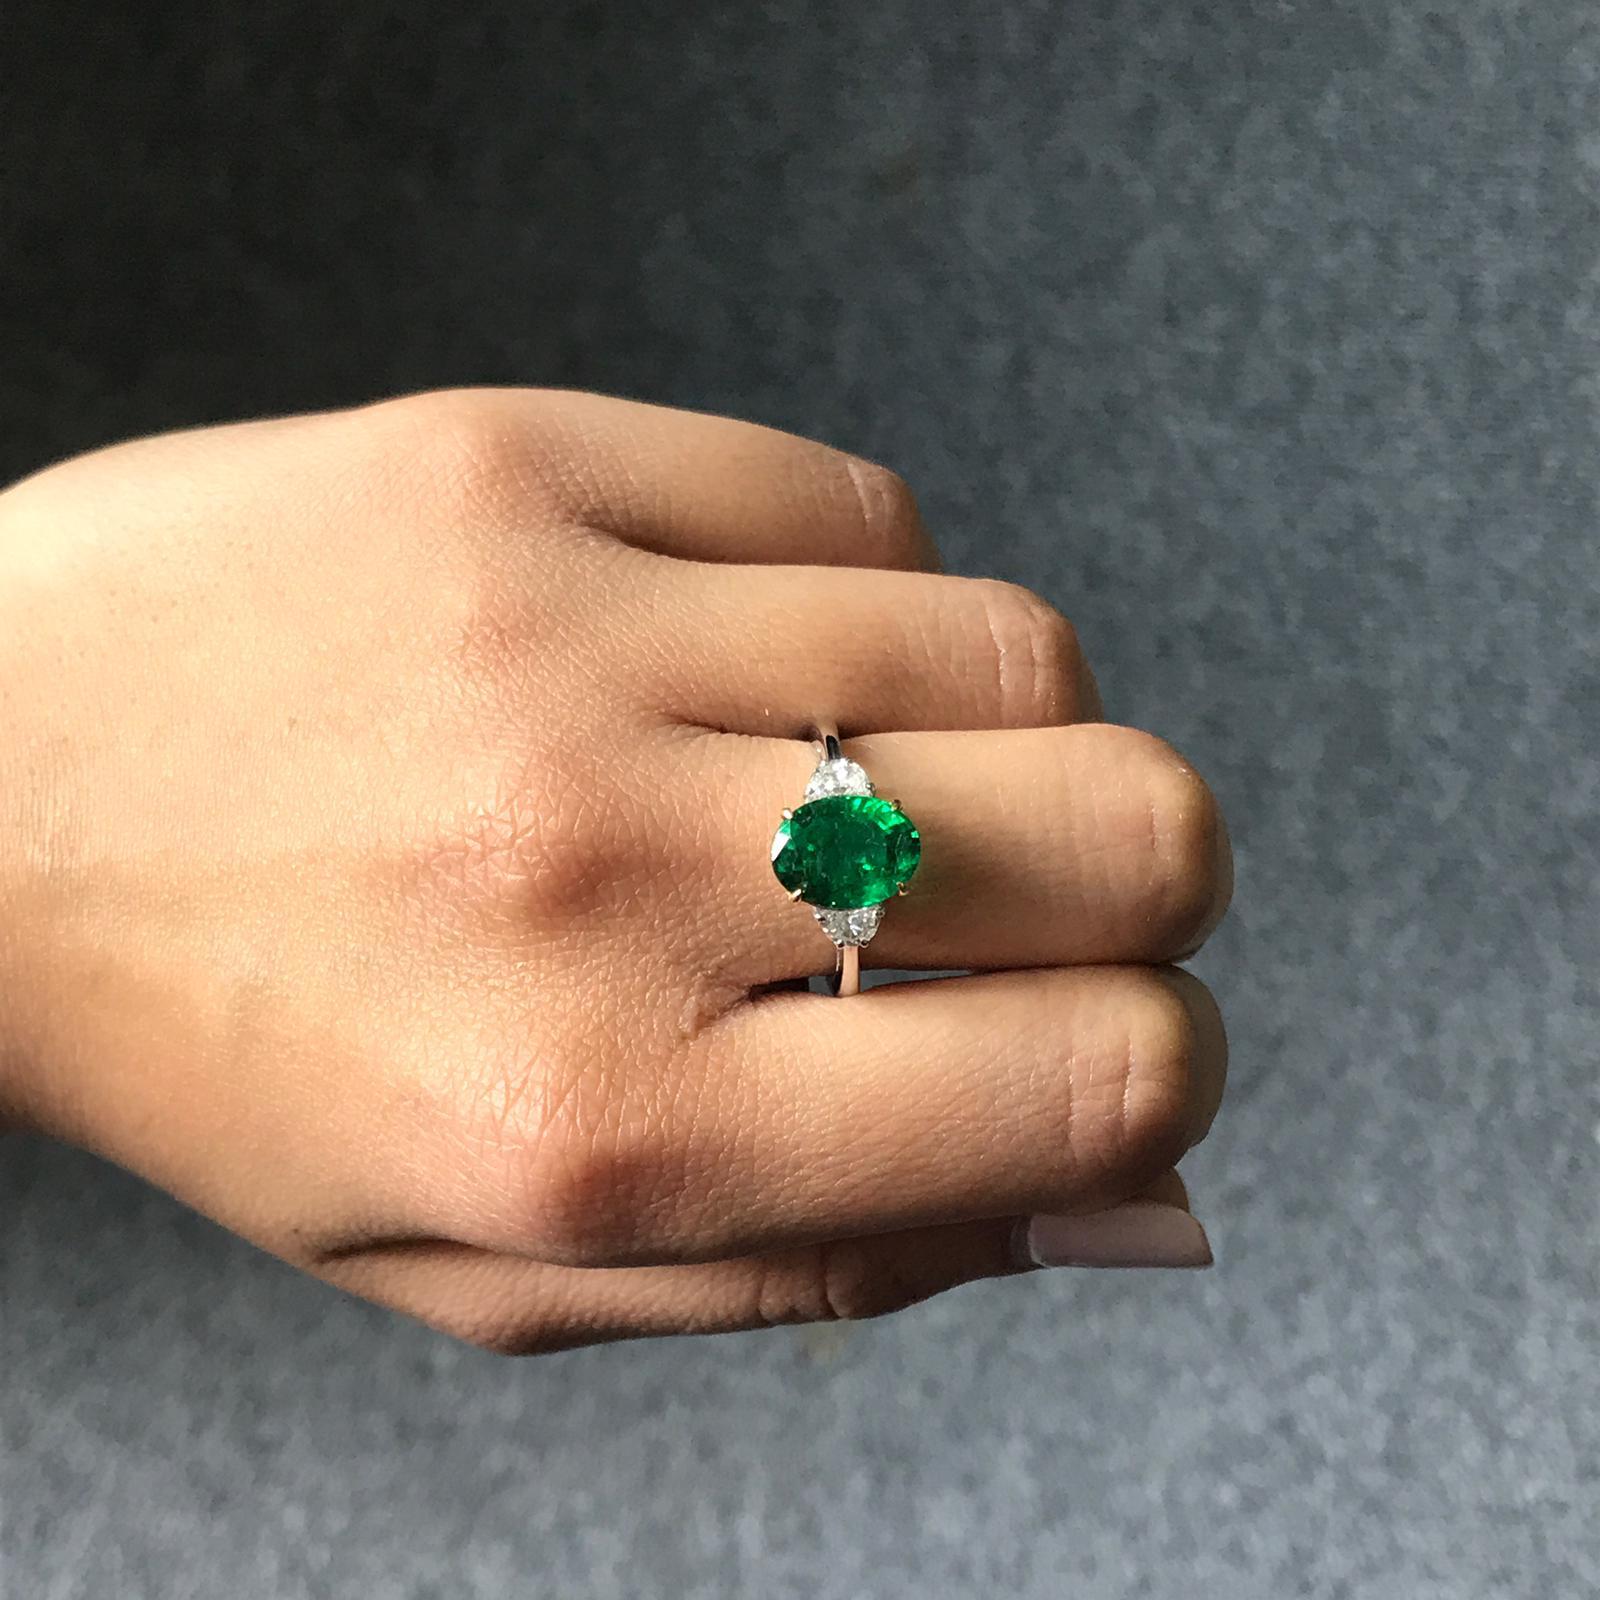 A classic three stone ring, with a 3.22 carat high quality and great colour oval cut Zambian Emerald centre stone and 2 half-moon 0.36 carat side stone Diamonds. Currently a ring size US 6, but we can resize the ring for you without additional cost.